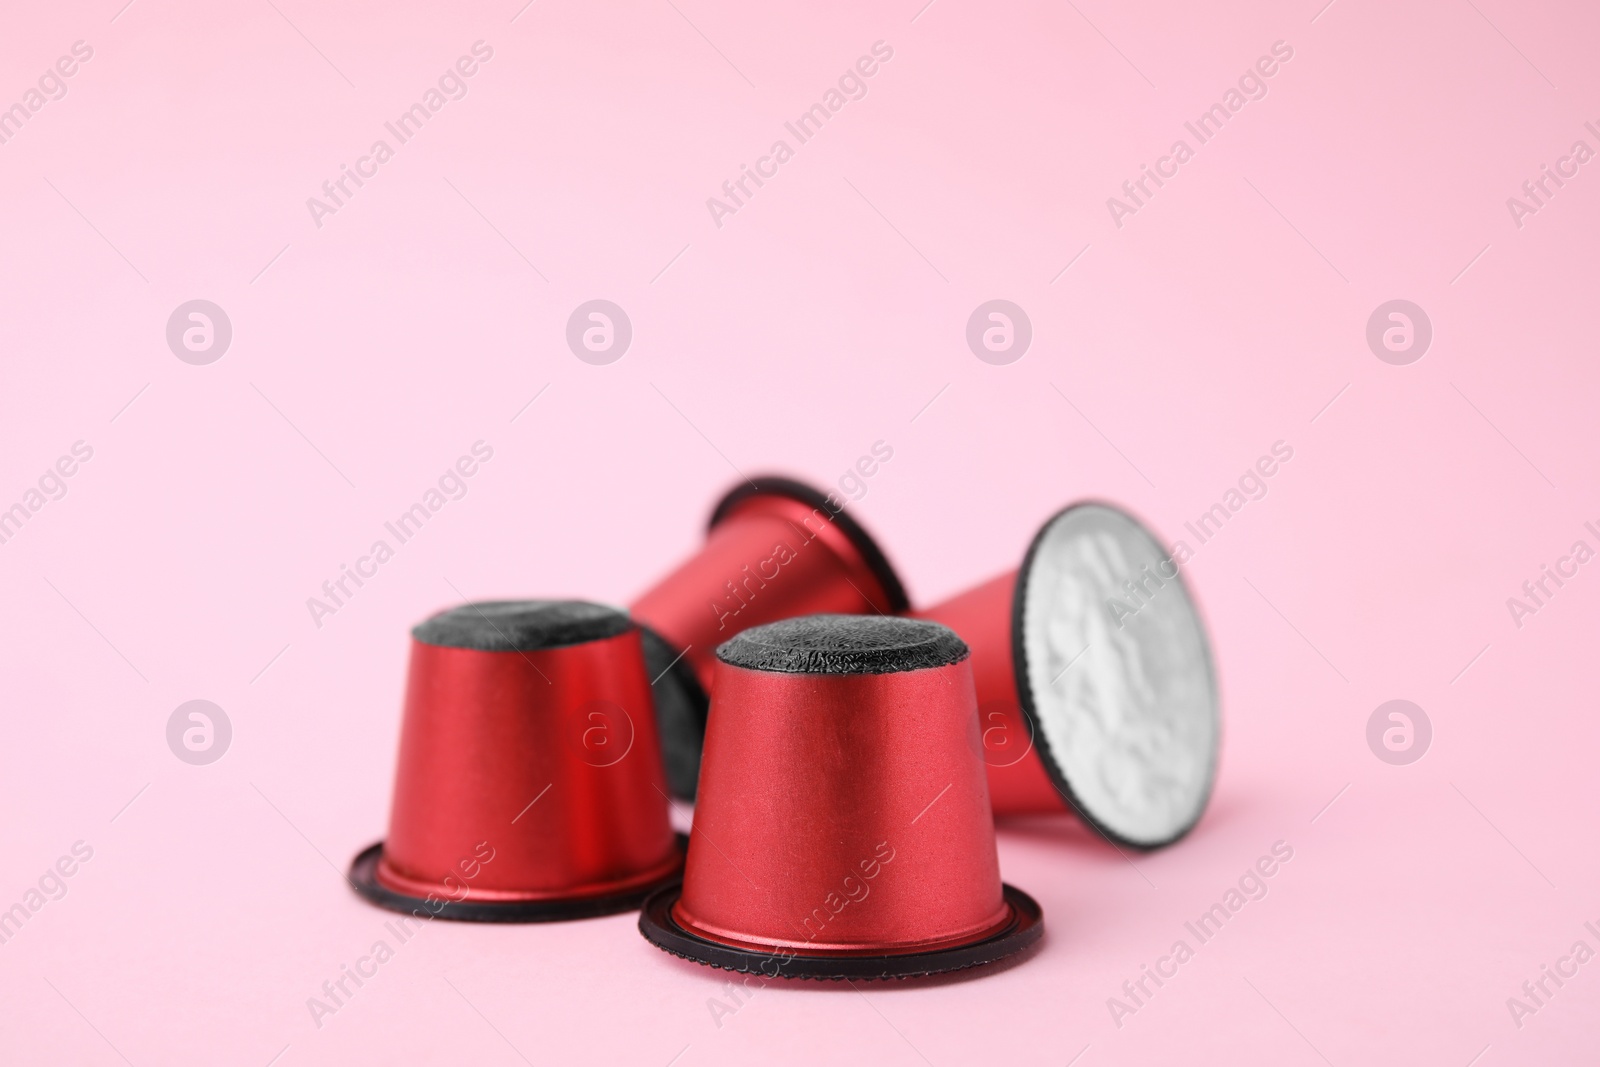 Photo of Many plastic coffee capsules on pink background, closeup